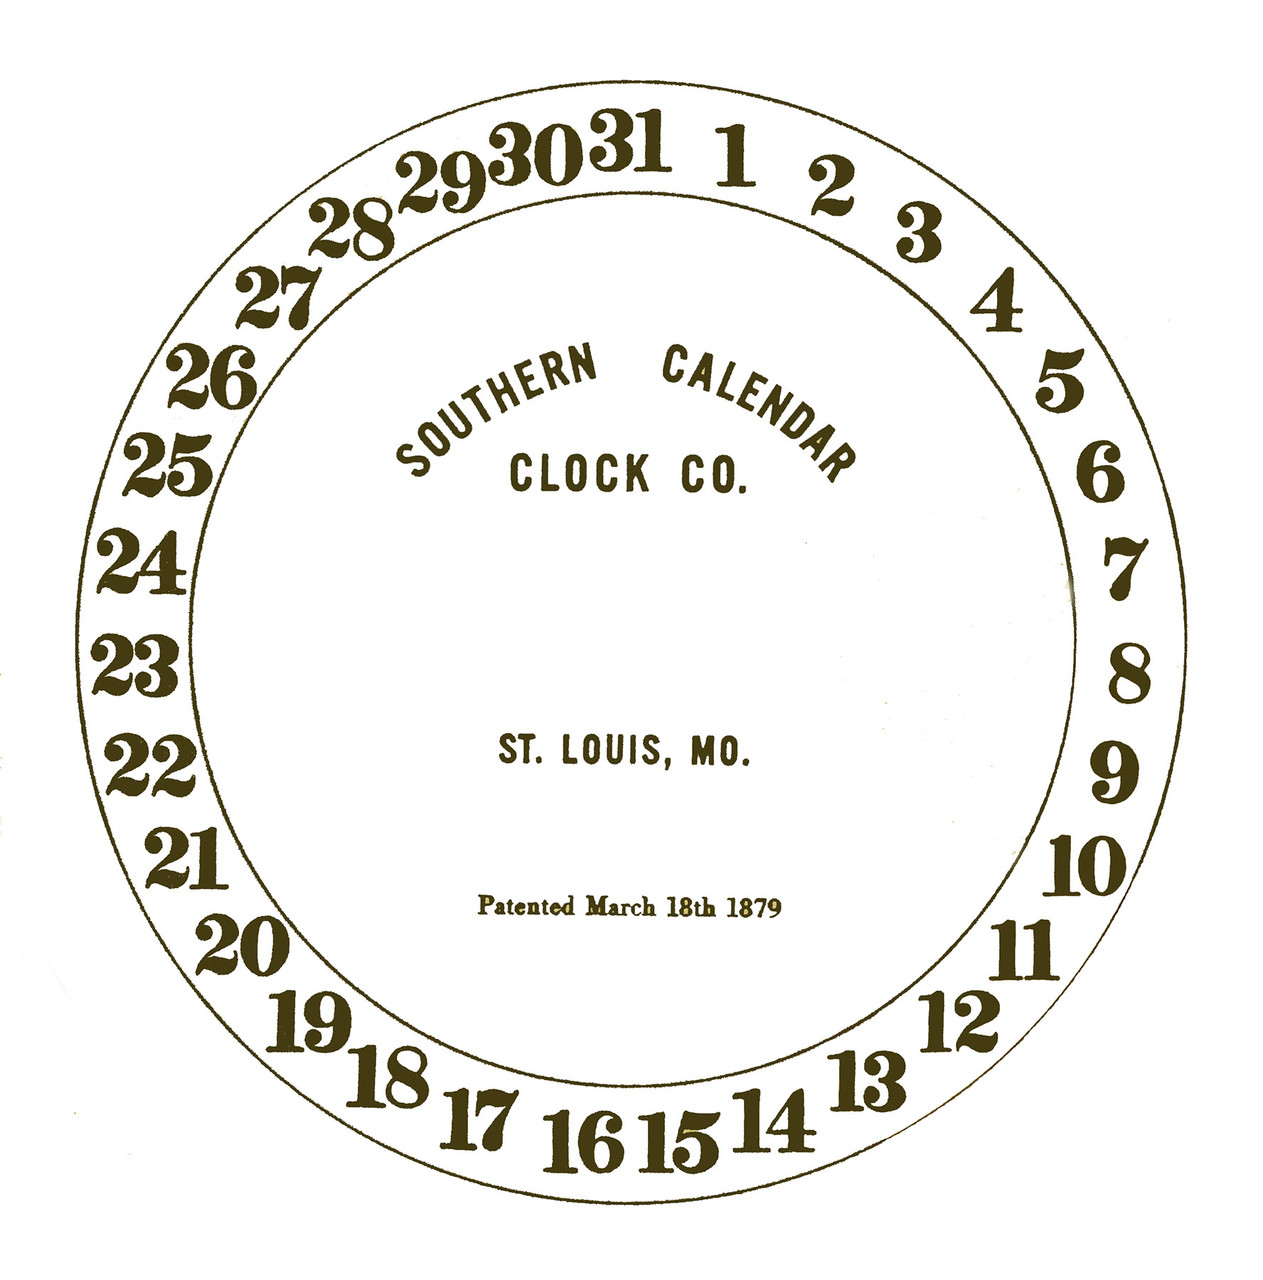 SOUTHERN CALENDAR CLOCK DATE WITH PATENT PAPER DIALS 7 1/2"